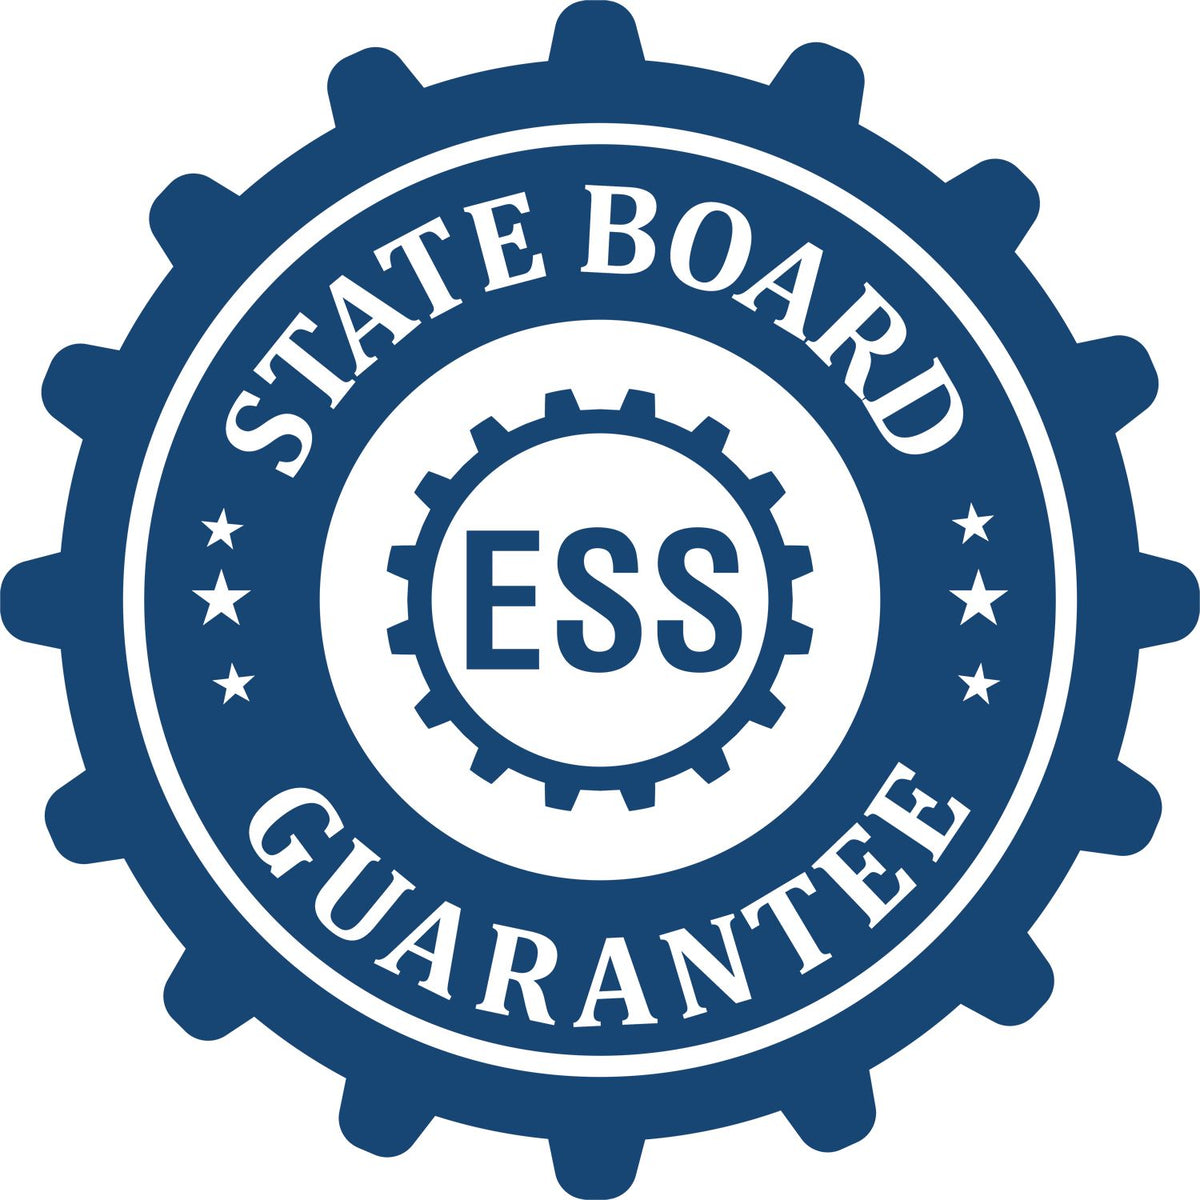 An emblem in a gear shape illustrating a state board guarantee for the Soft Pocket Delaware Landscape Architect Embosser product.